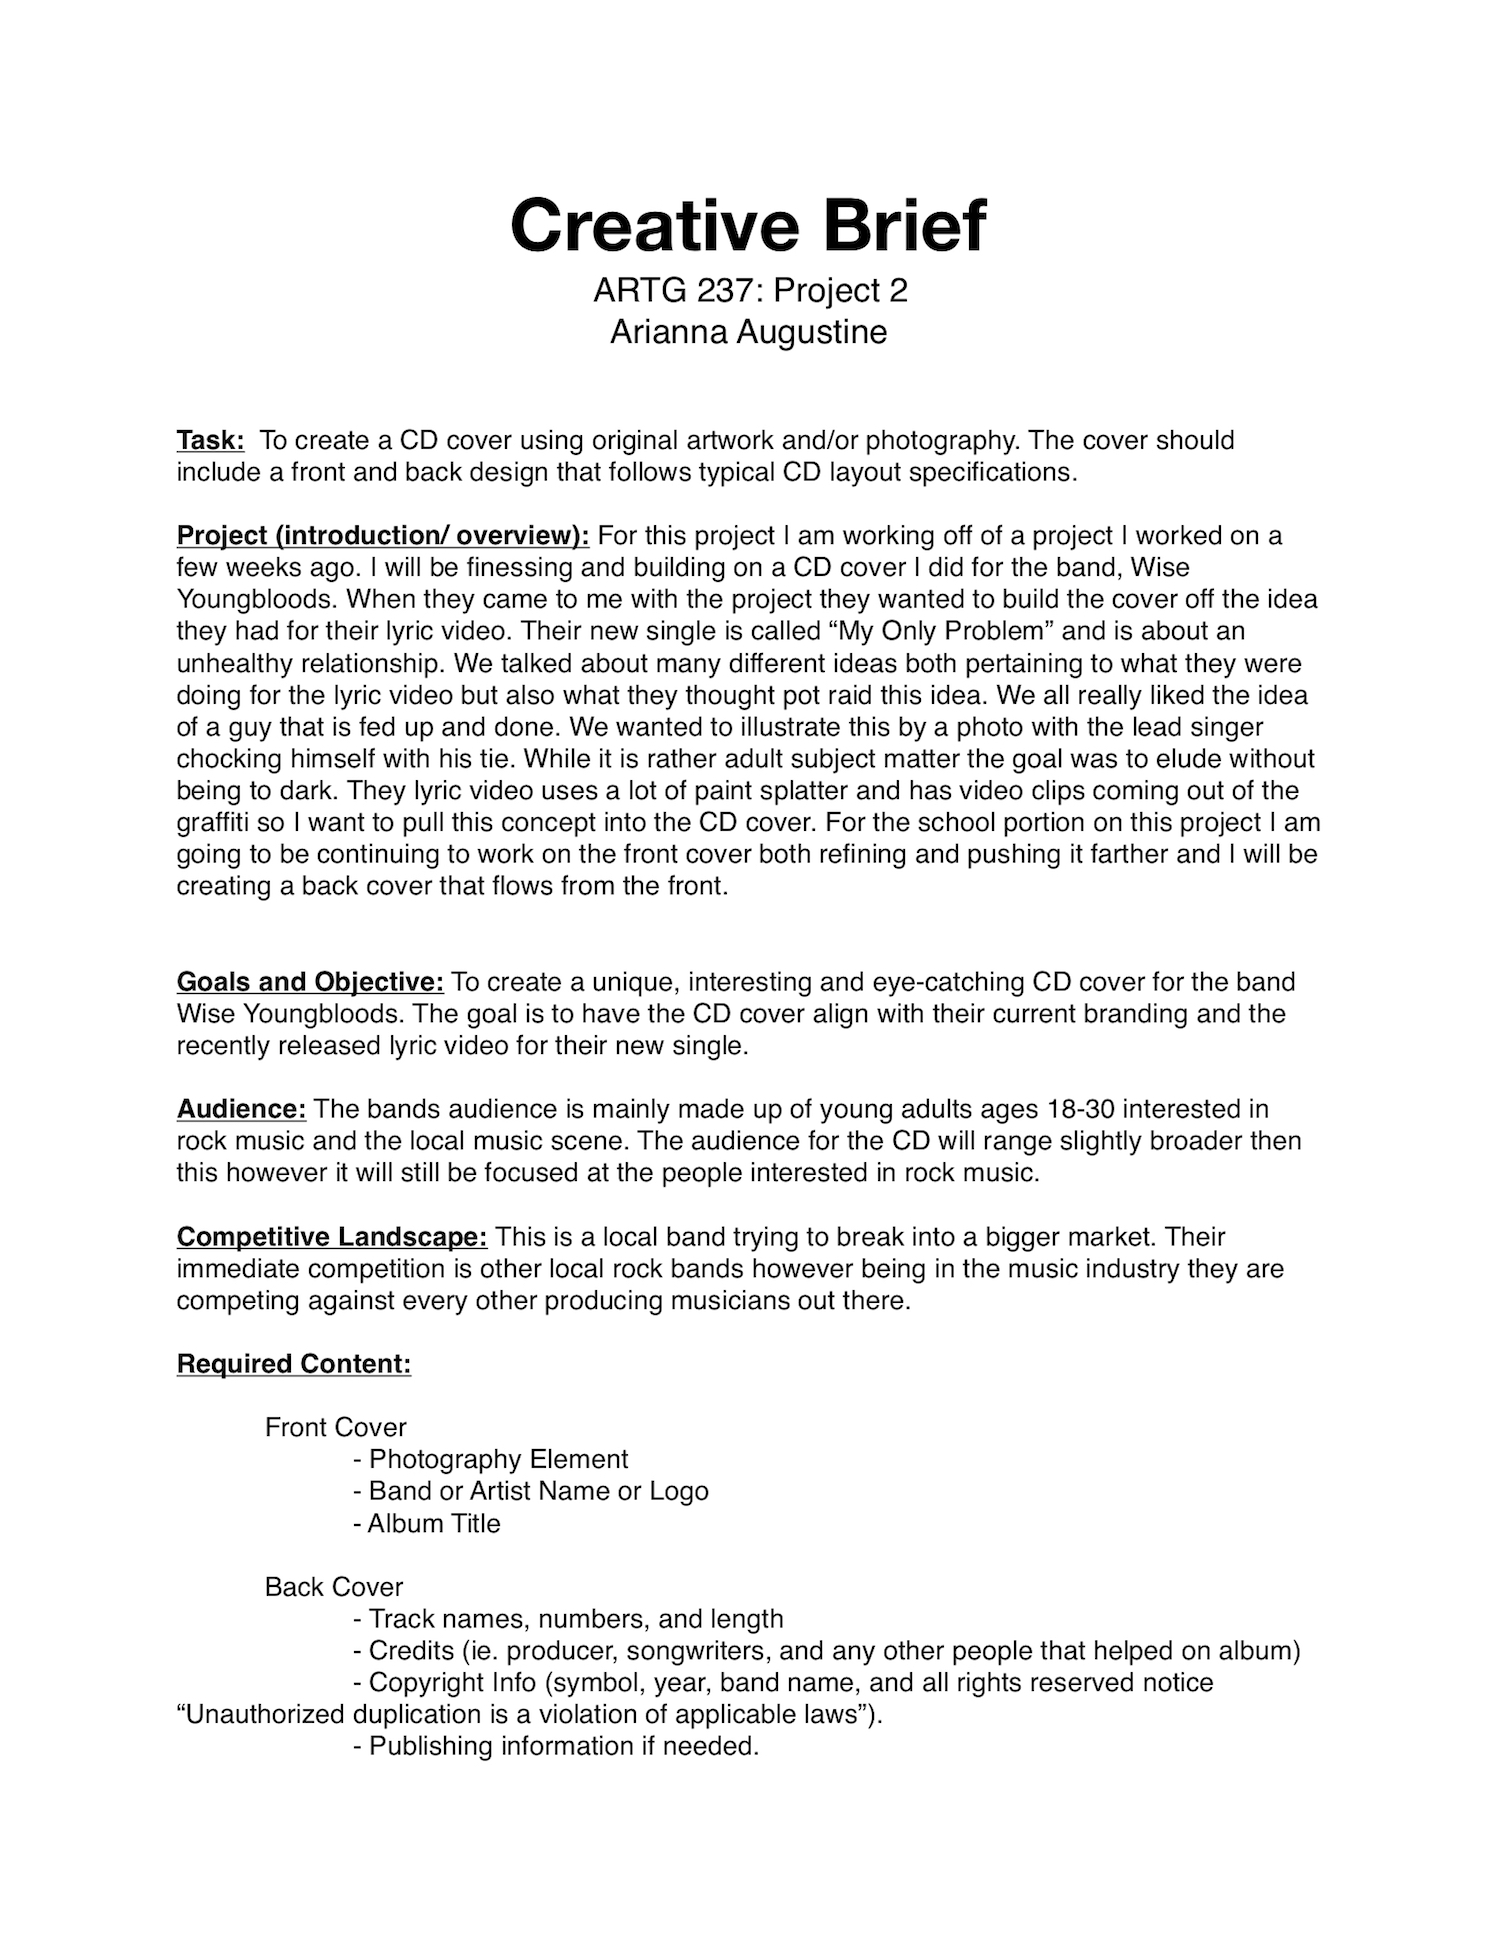 First page of creative brief